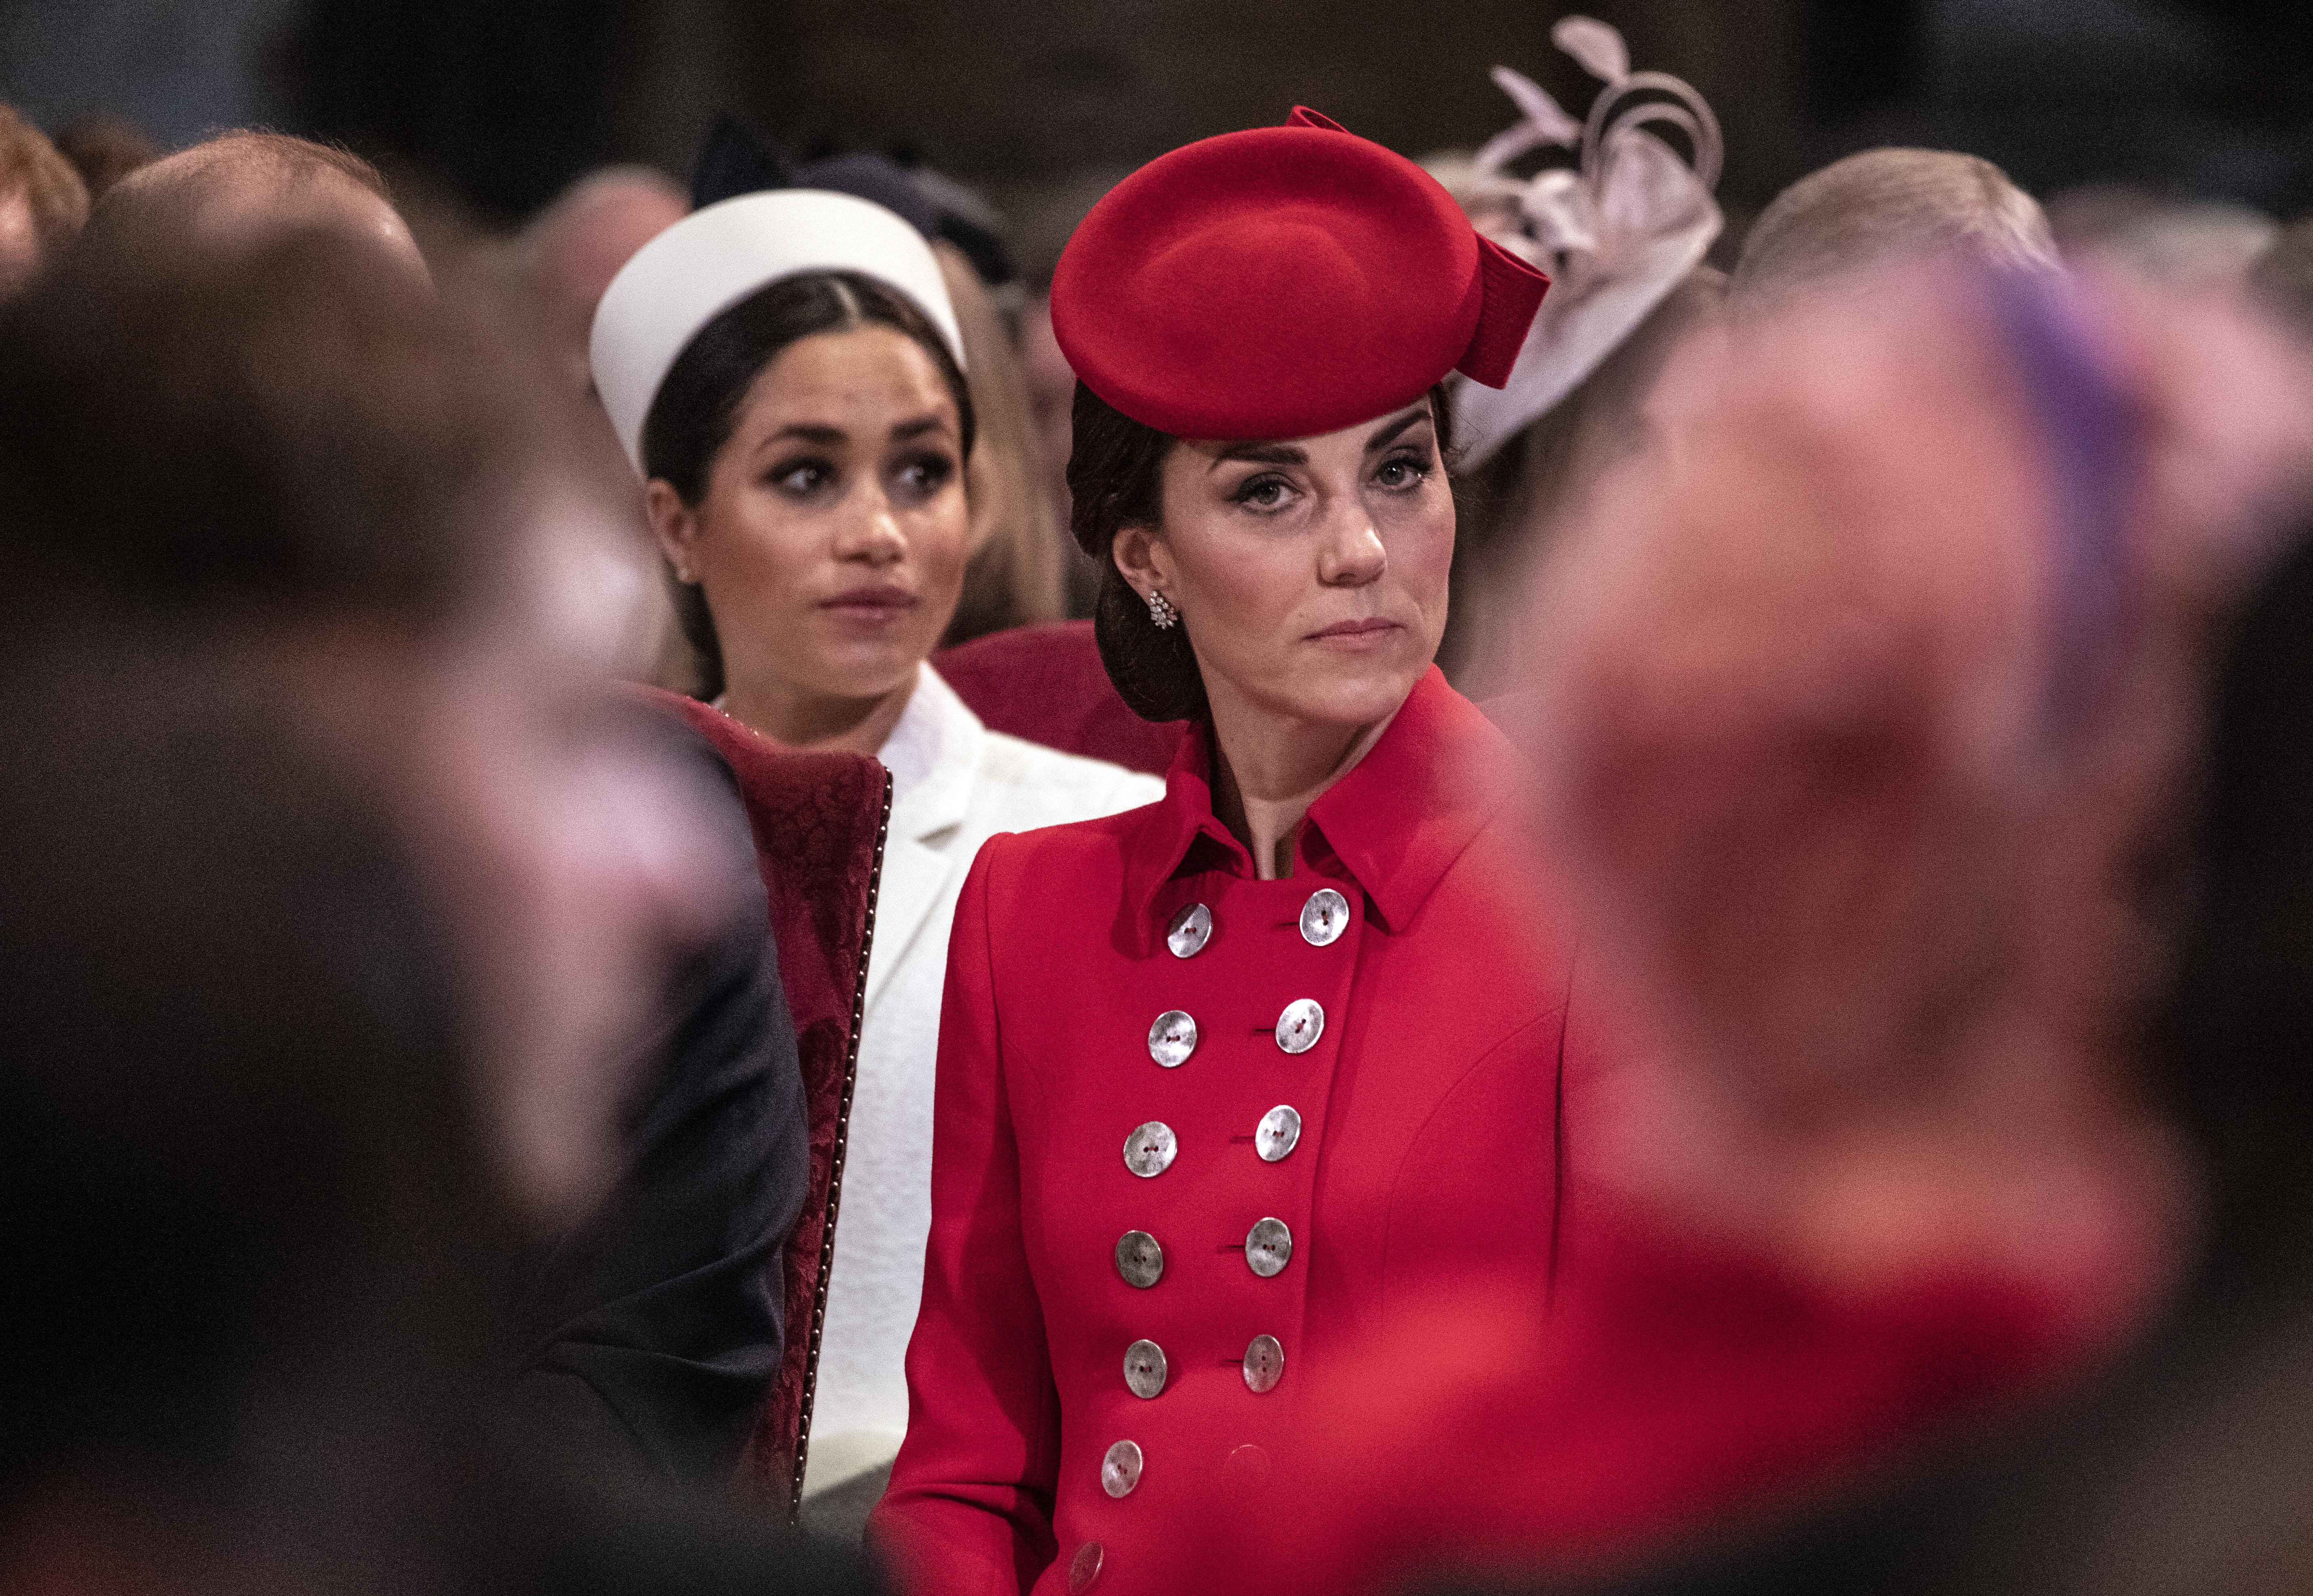 Meghan Markle and Kate Middleton during the Westminster Abbey Commonwealth day service on March 11, 2019 in London, England ┃Source: Getty Images